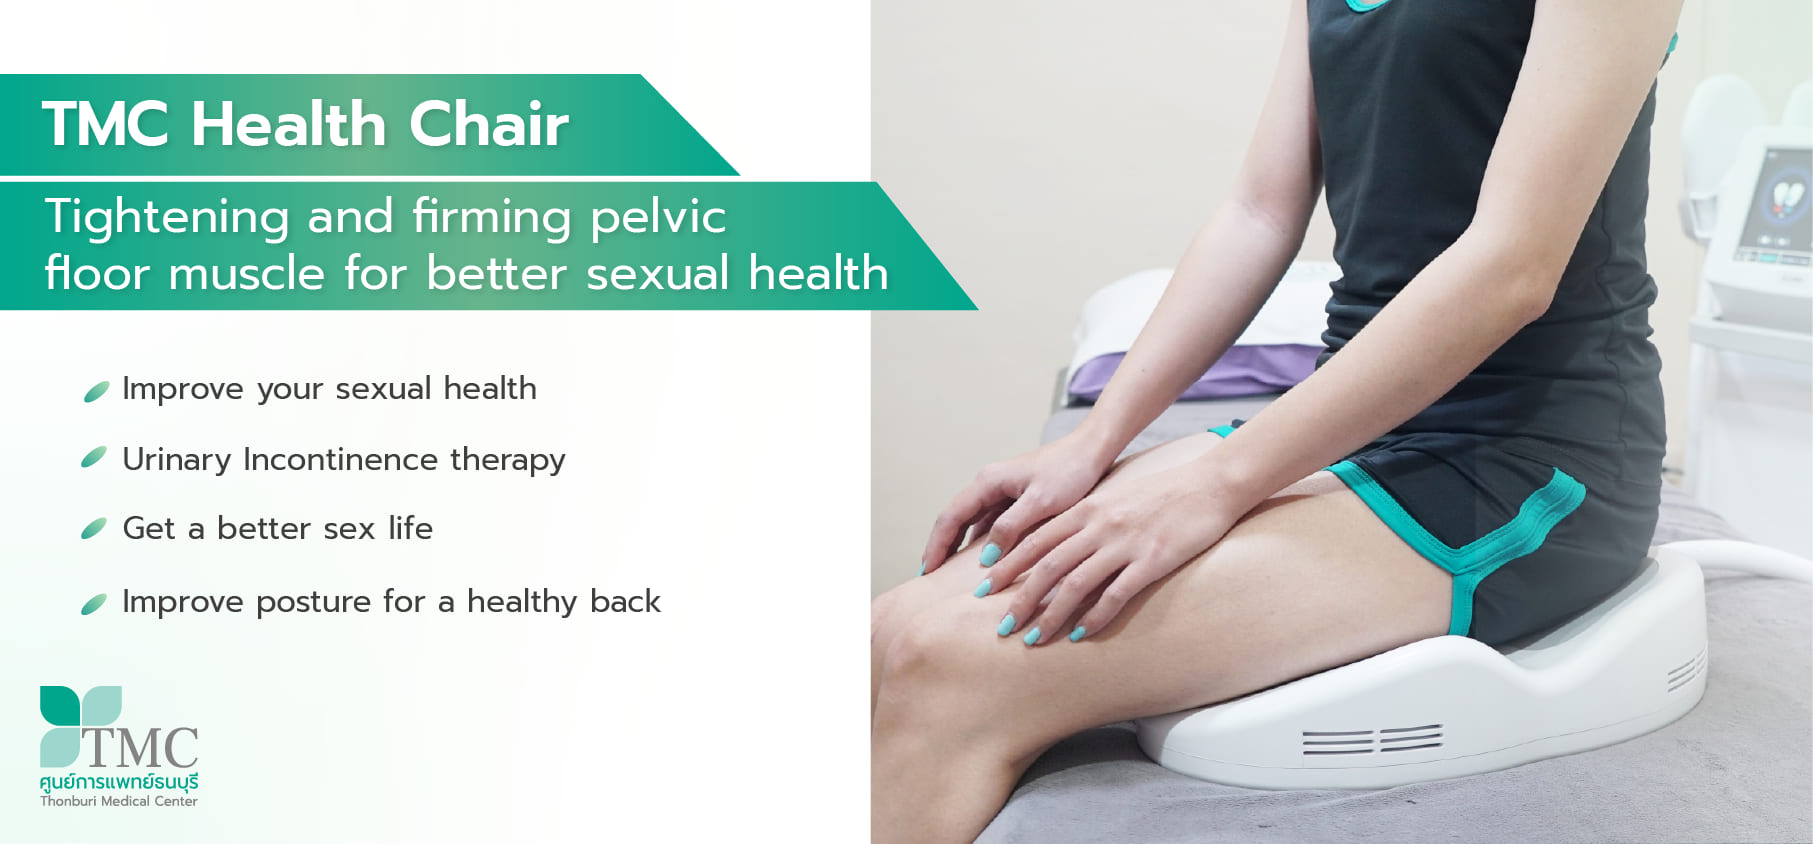 Improving Sexual Health and Firming Pelvic Muscle with TMC Health Chair